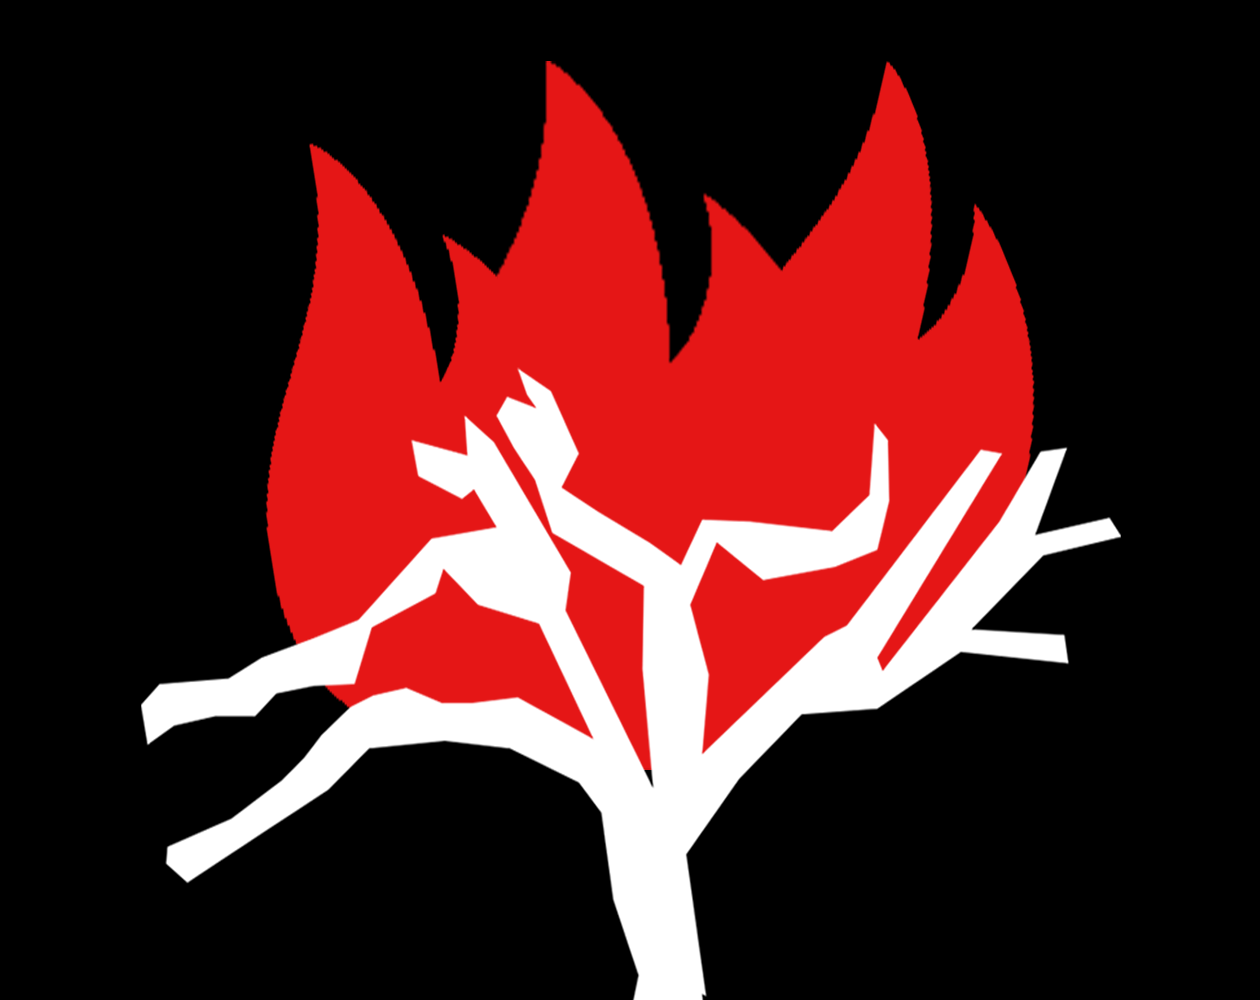 A badly traced white tree under a black background, with a lowres, red, minimalist flame burning without it.